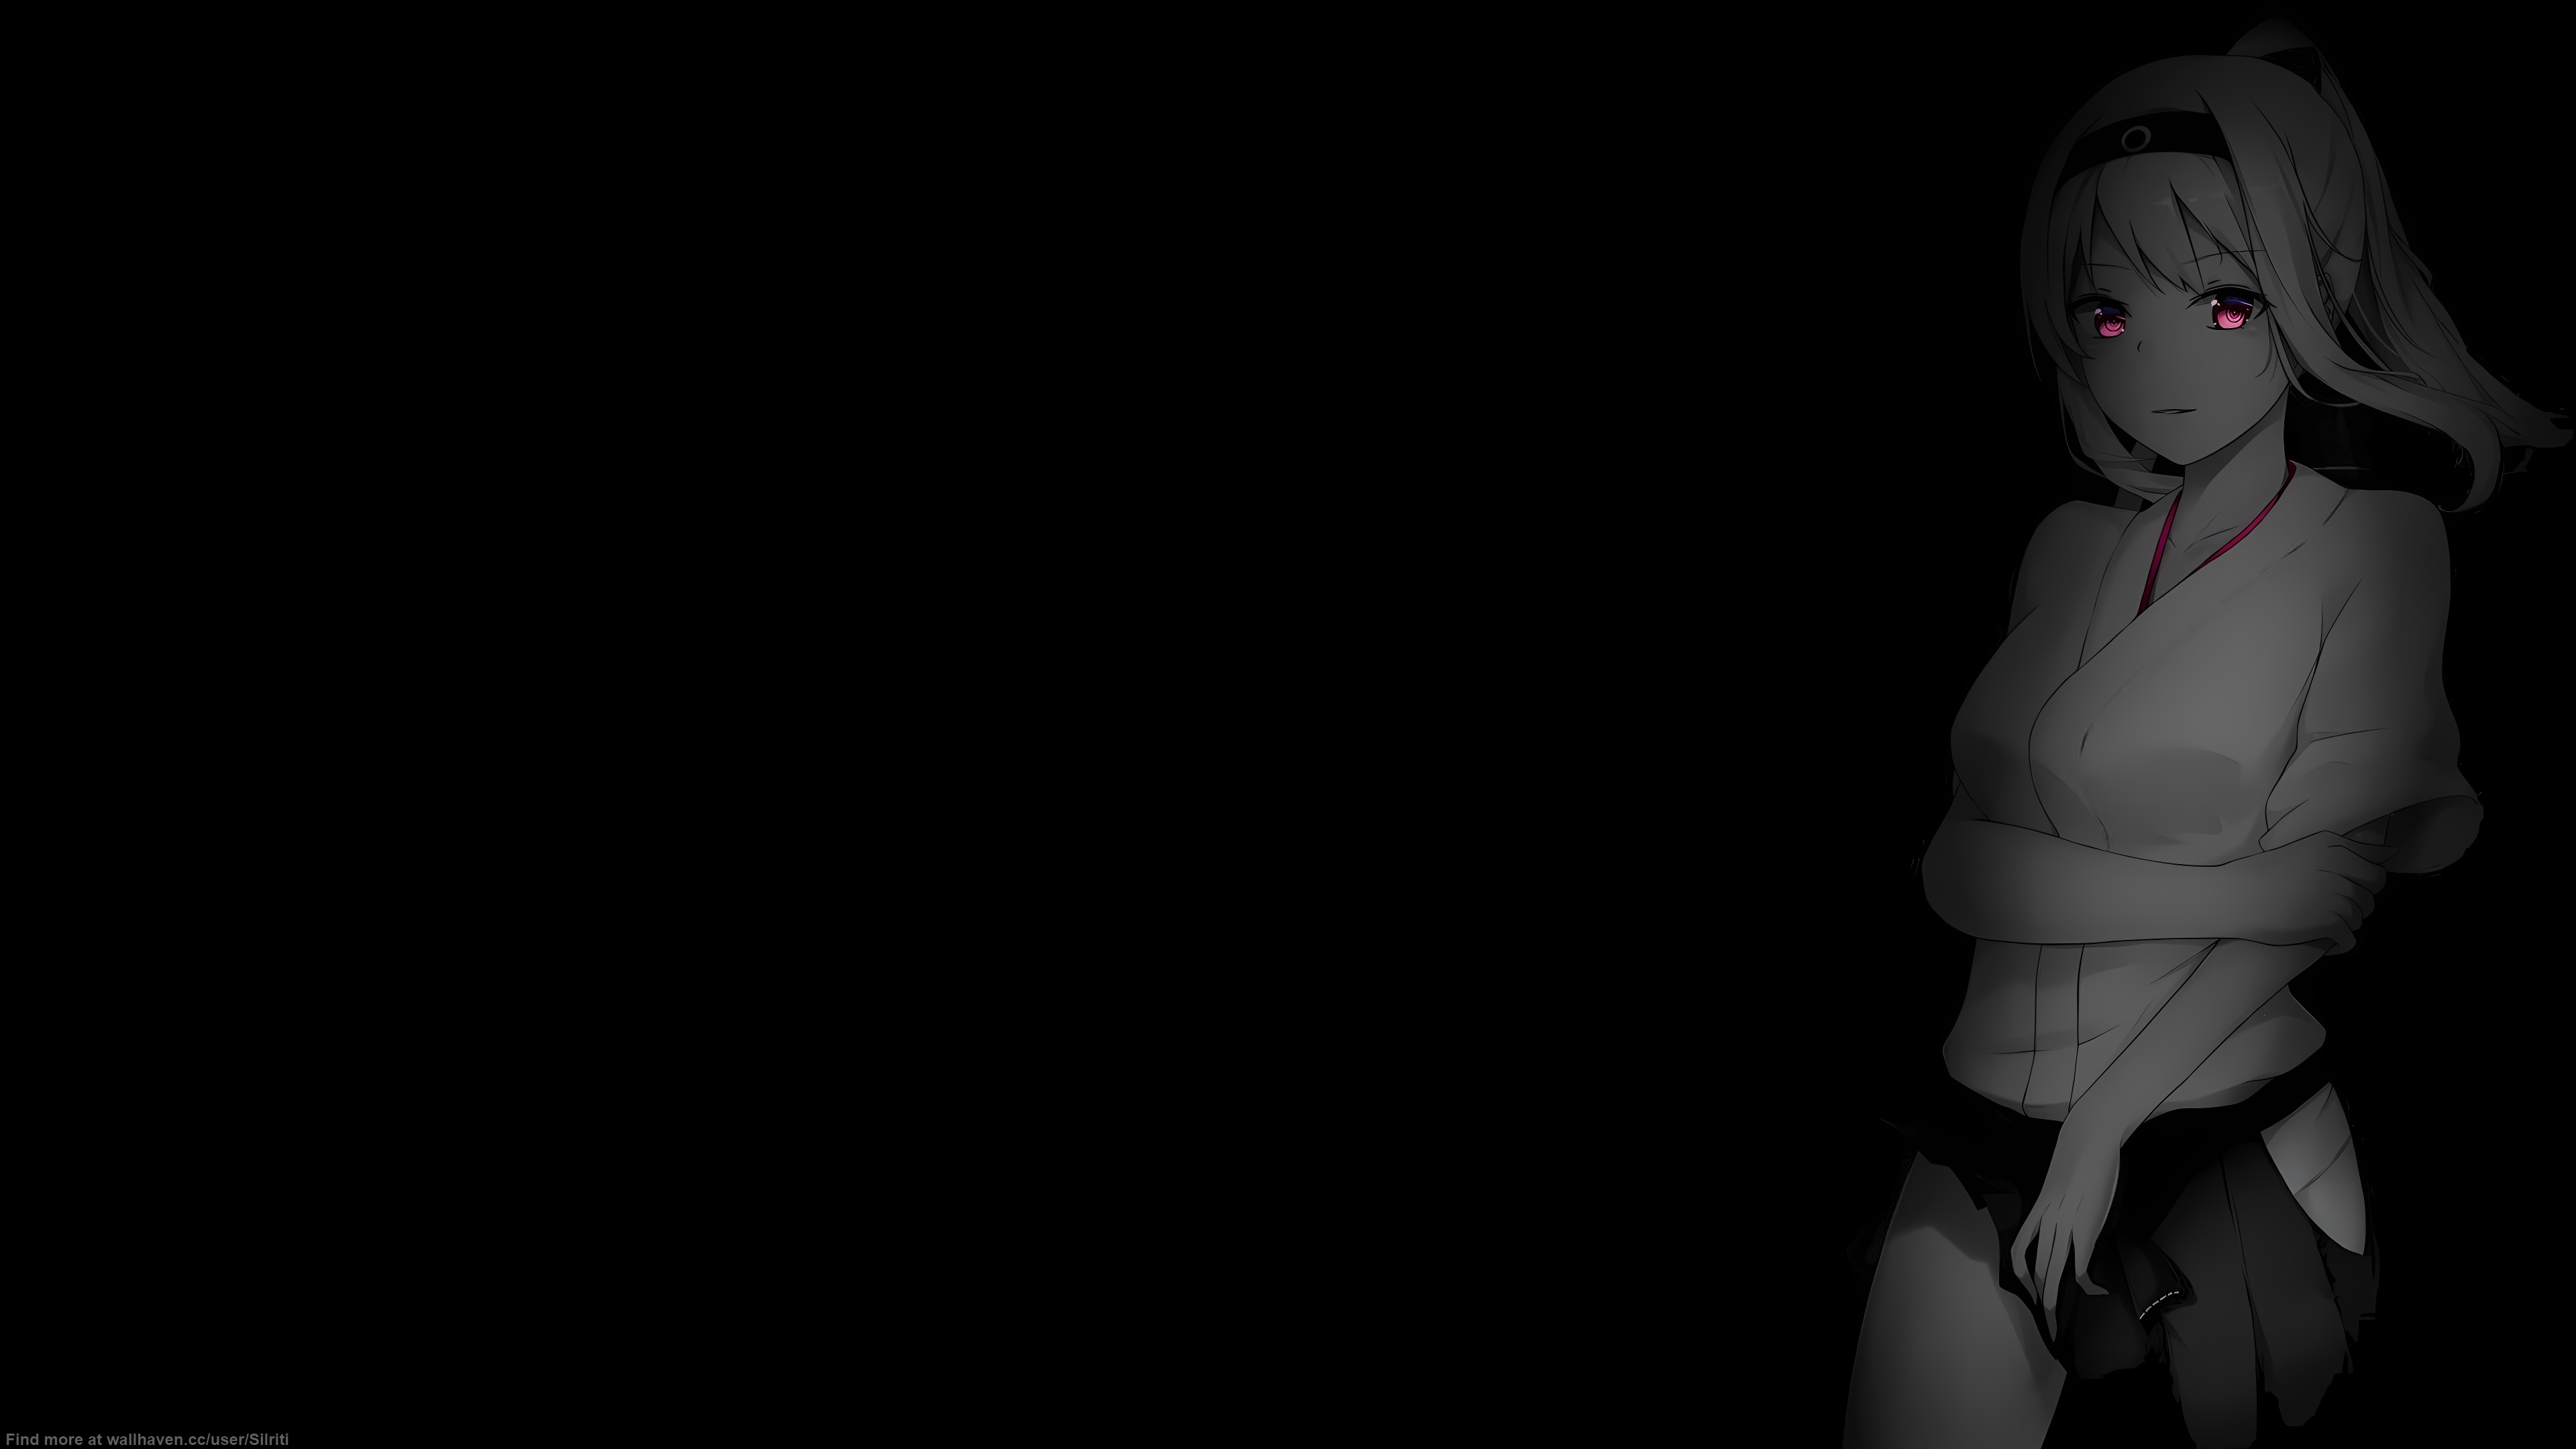 Anime 3840x2160 selective coloring black background dark background simple background anime girls minimalism